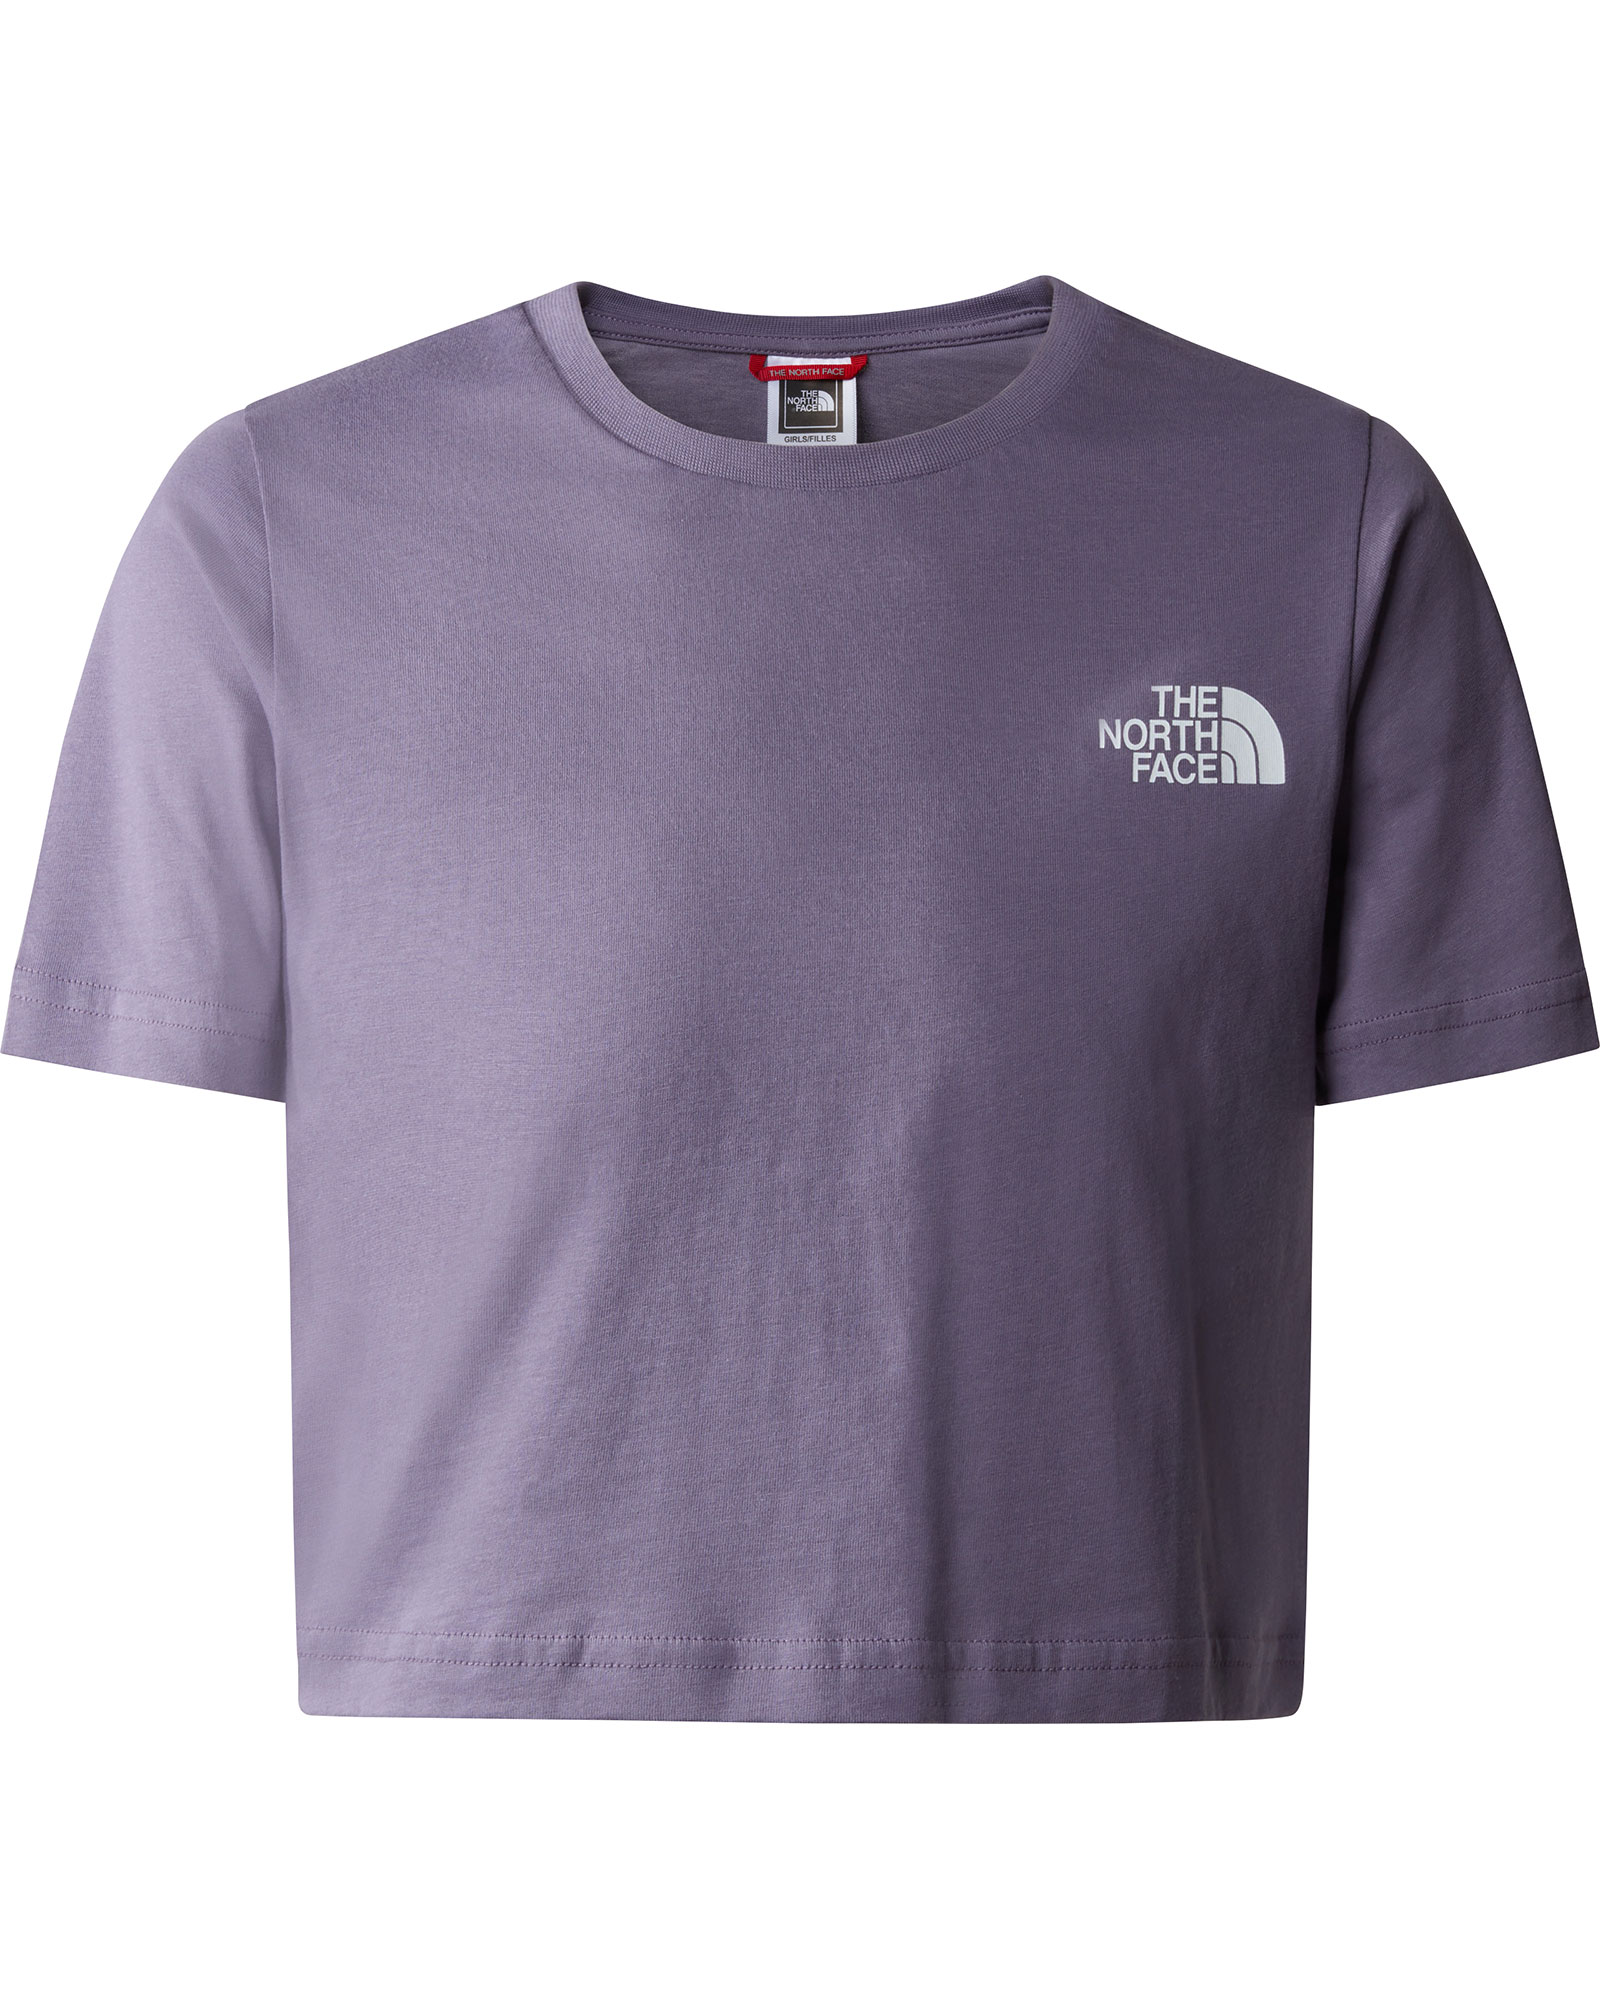 The North Face Girl’s Crop Simple Dome T Shirt - Lunar Slate L